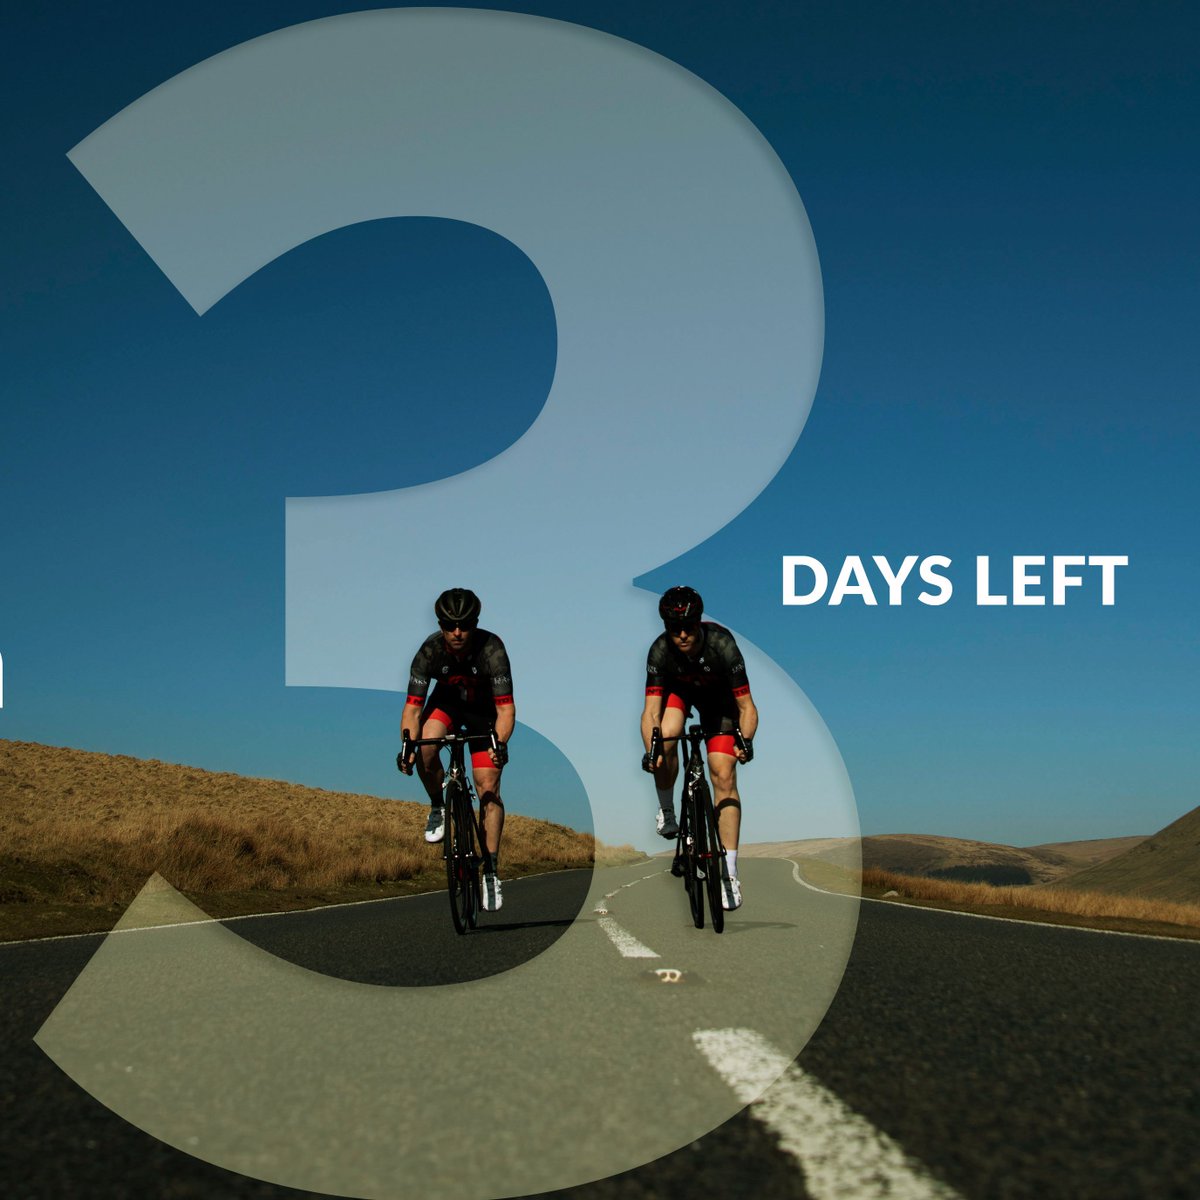 Get that #FridayFeeling ! Buy yours while you can. nfto.com @cryeofficial @oakley @Velo1Shop @level_peaks #cycling #cyclingkit #fitness #workout #lifestyle #multicam #nfto #roadbike #ontheroad #countdown